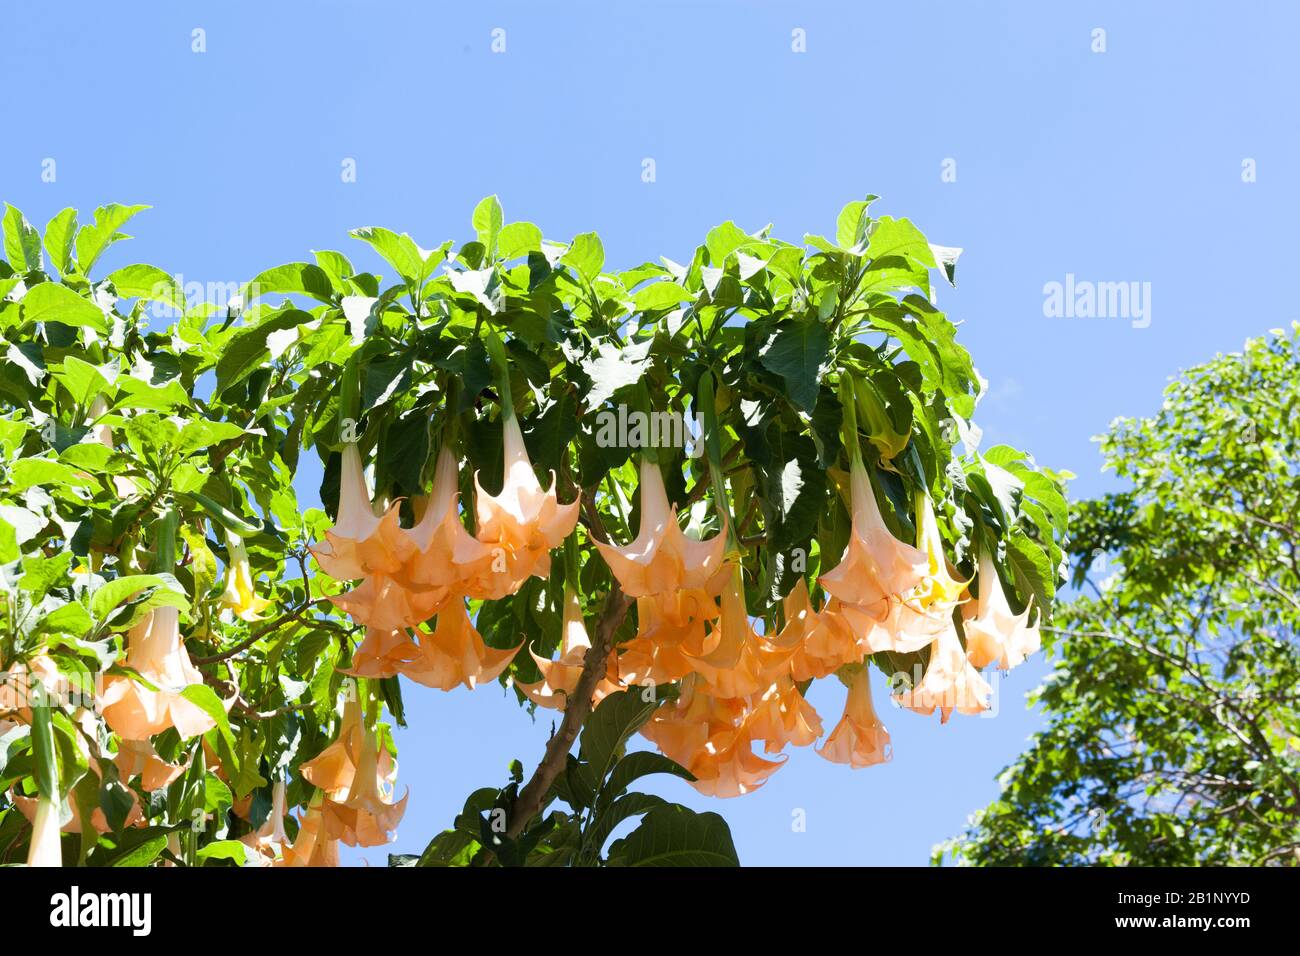 Brugmansia is a genus of seven species of flowering plants in the family Solanaceae. They are woody trees or shrubs, with pendulous flowers, and have Stock Photo